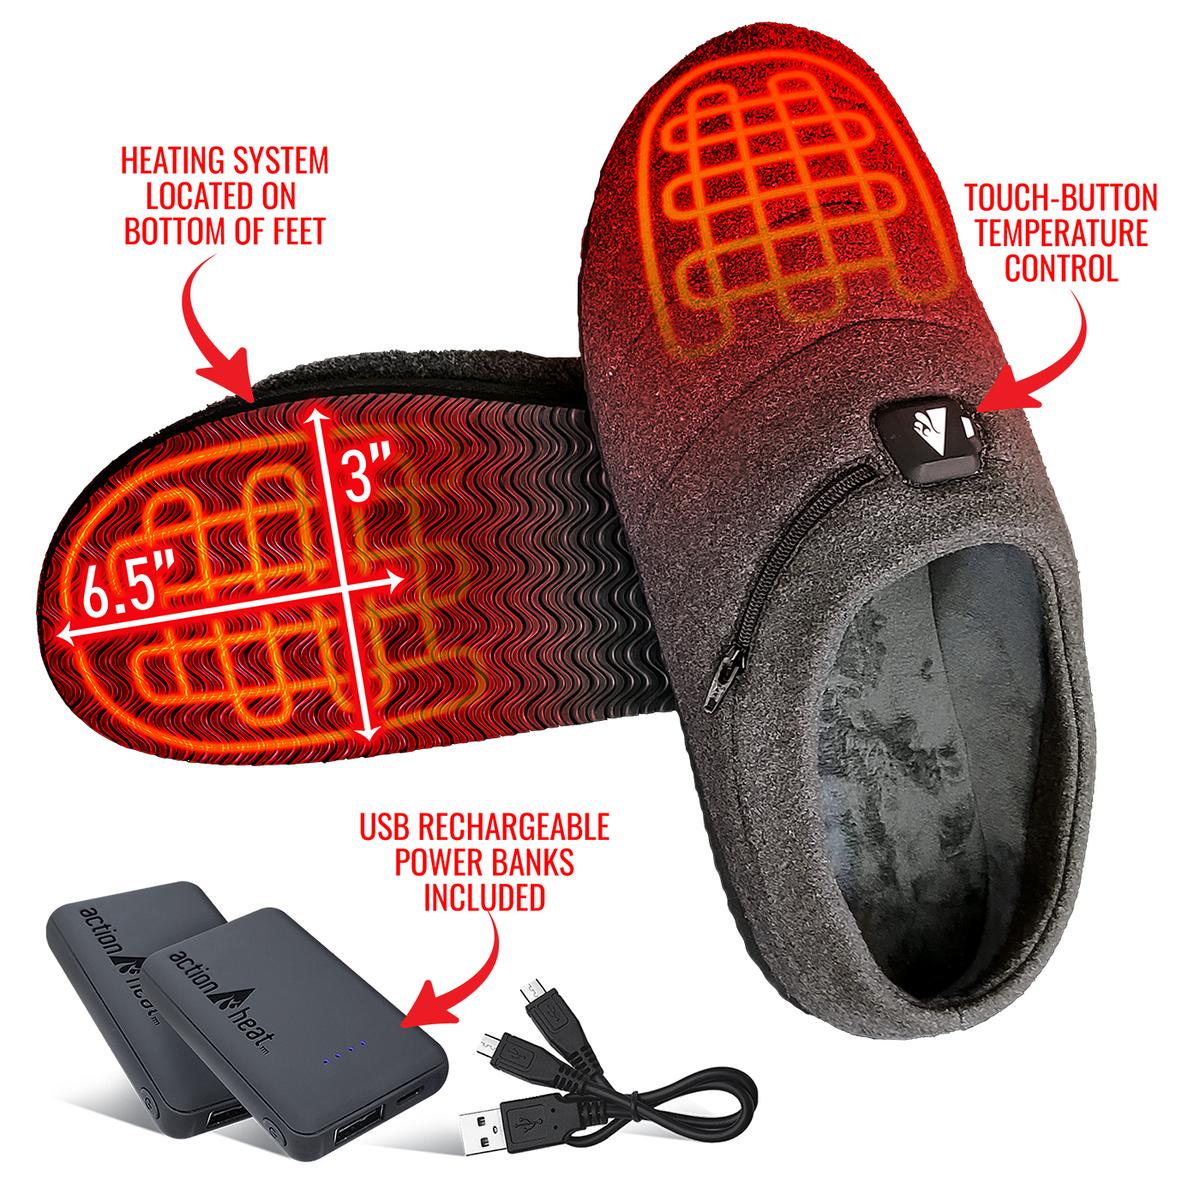 ActionHeat 5V Battery Heated Slippers - Back